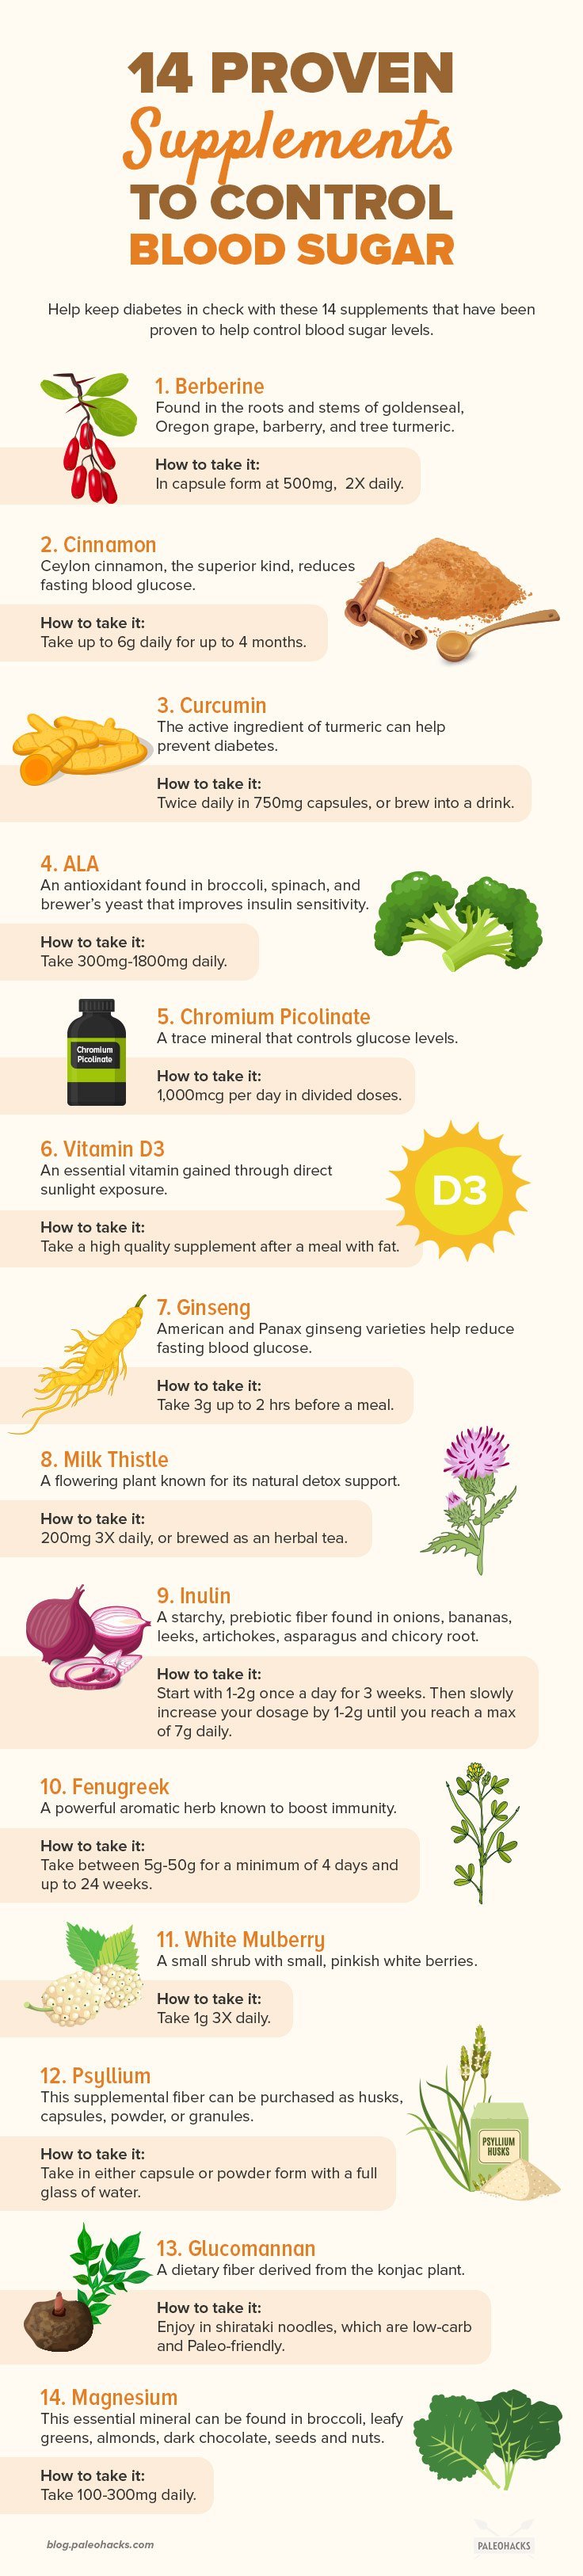 14-Proven-Supplements-to-Control-Blood-Sugar-infog.jpg